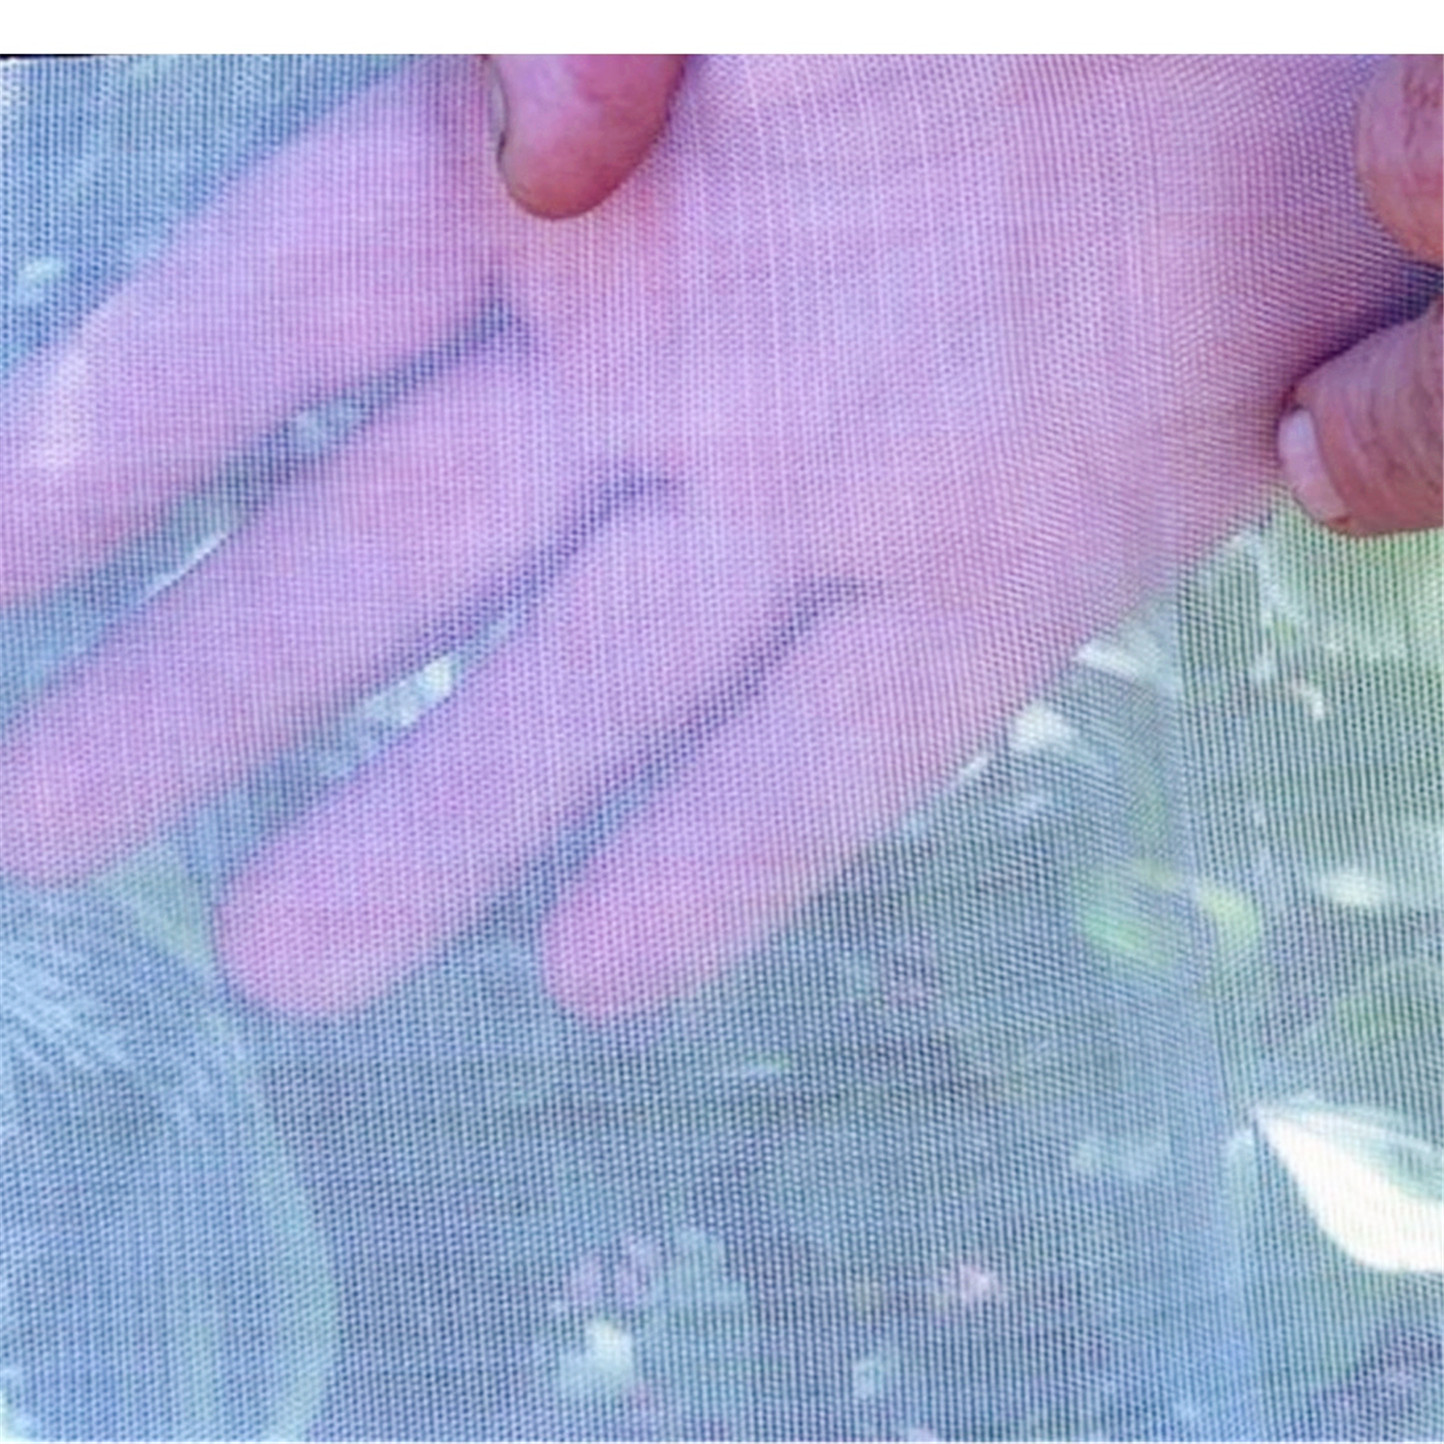 Chinese supplier of UV ANTI-INSECT NET